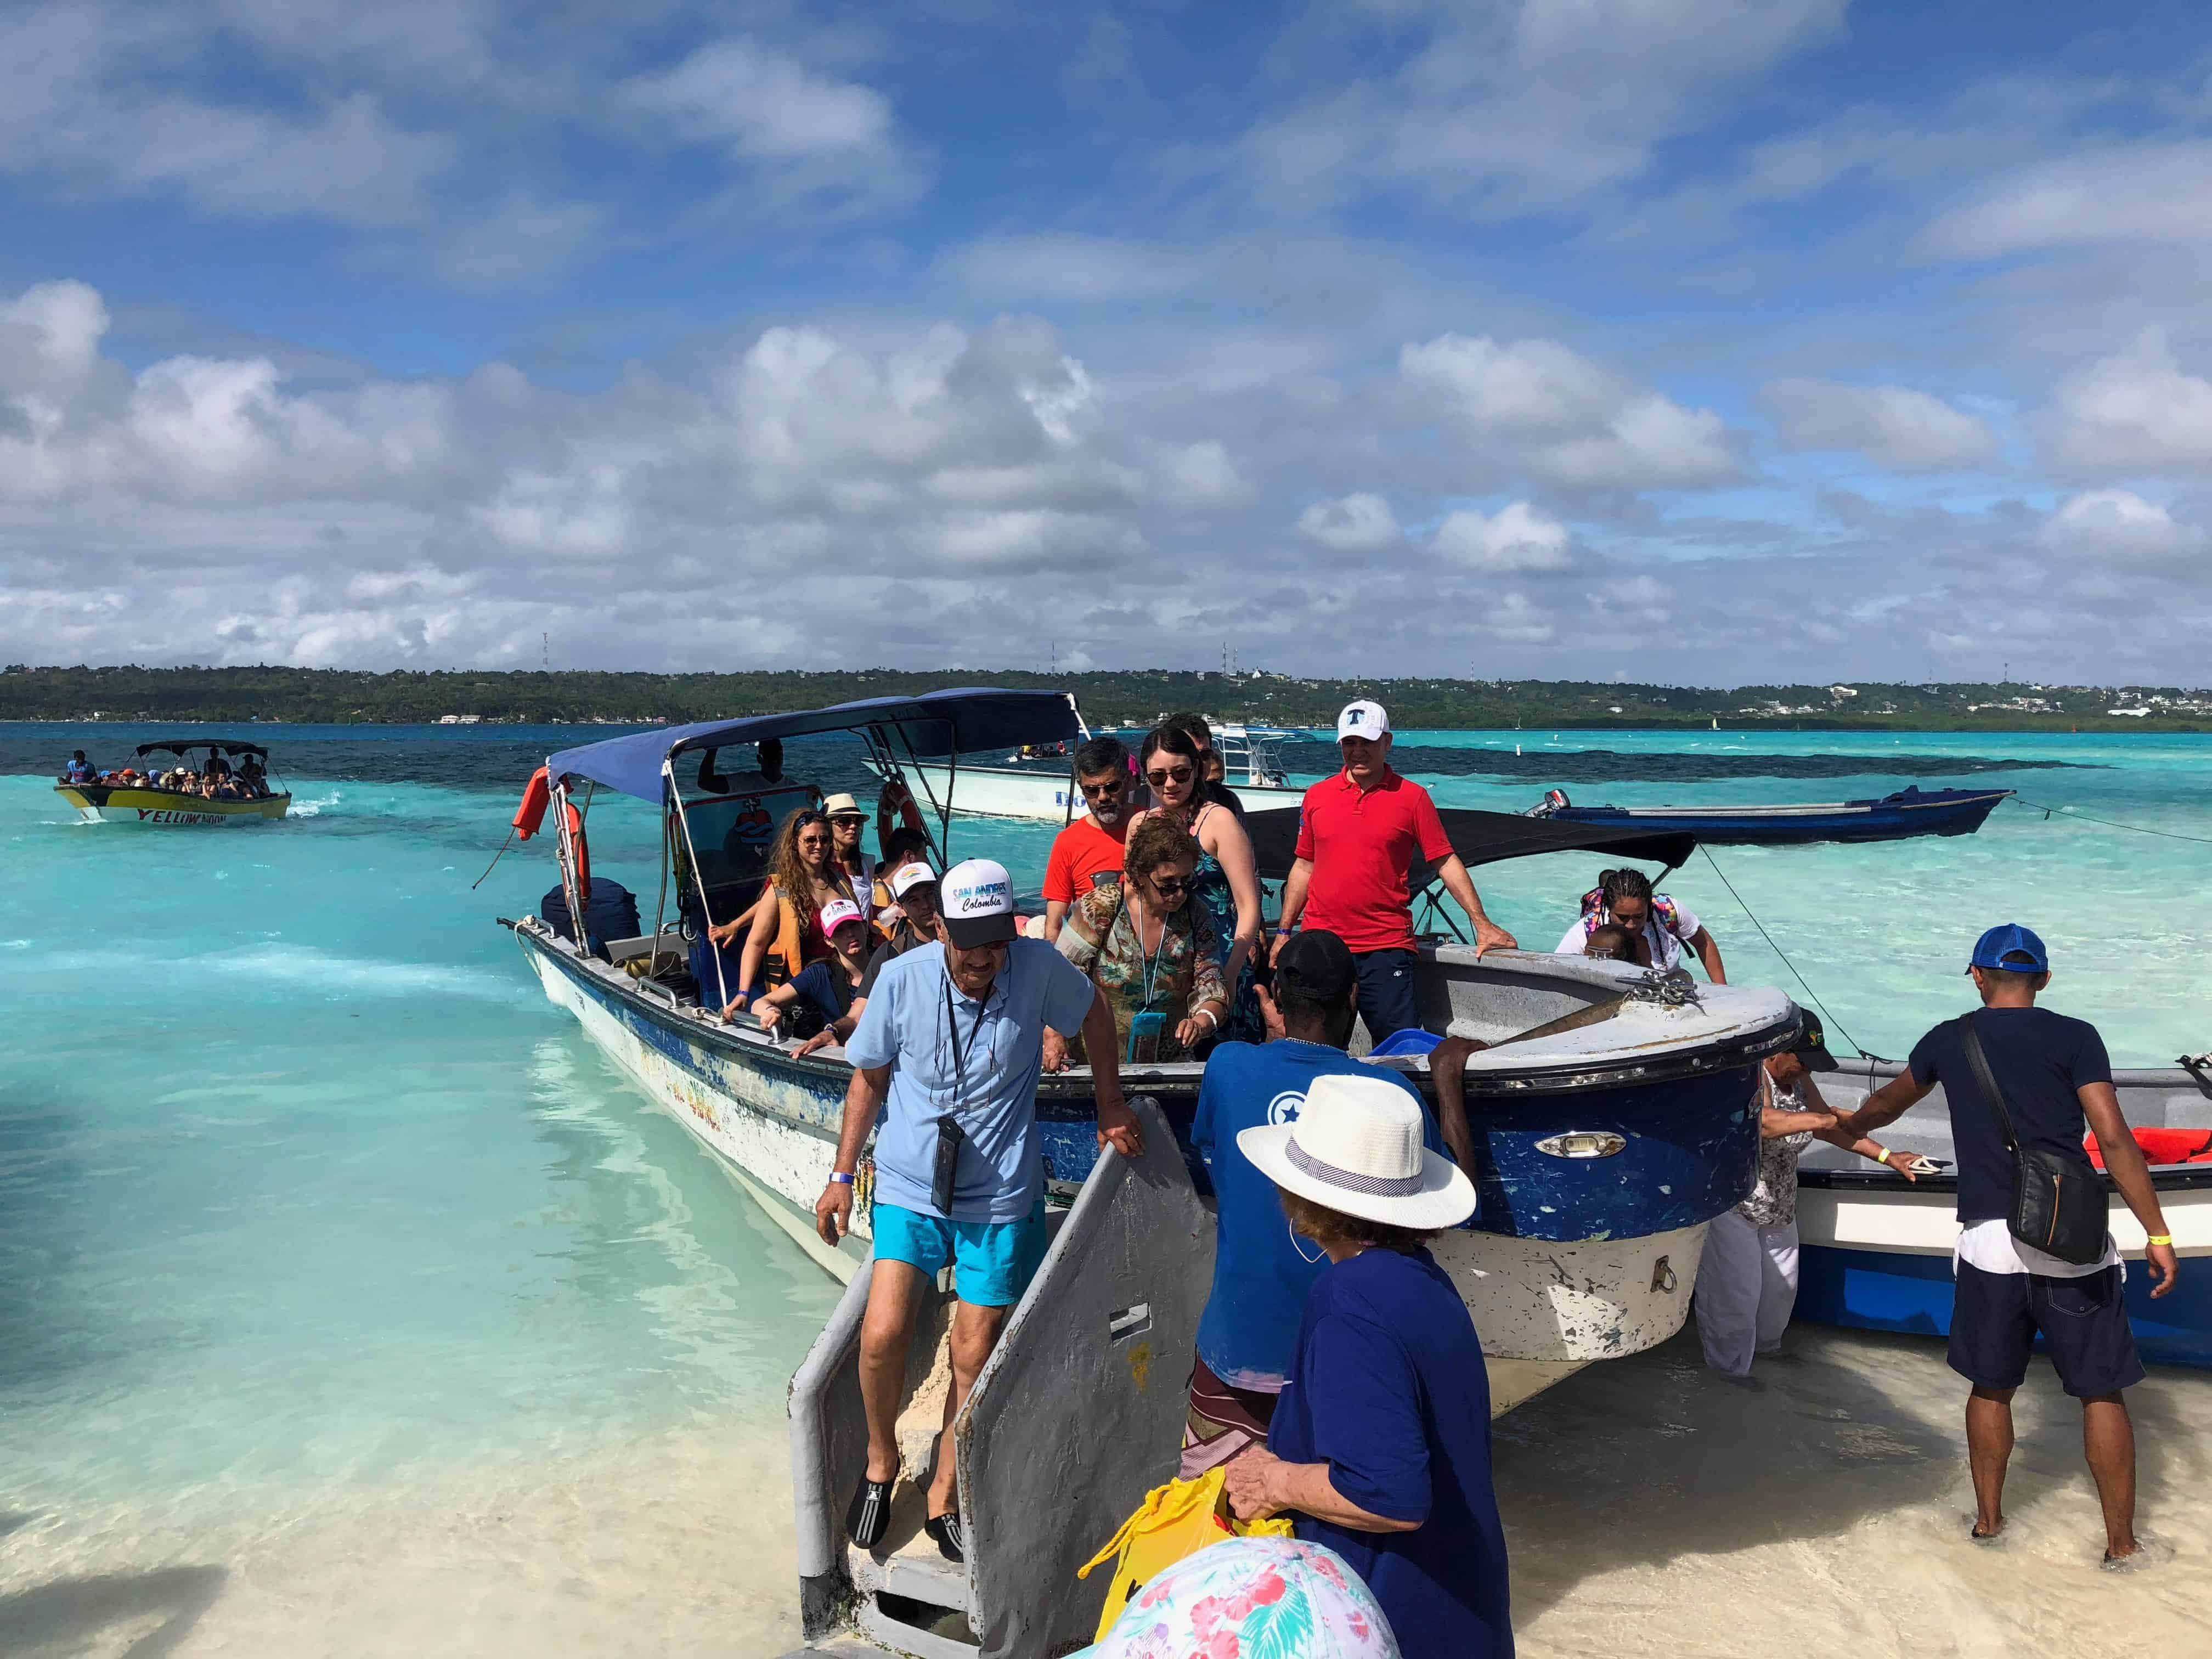 Arriving at Acuario in San Andrés, Colombia